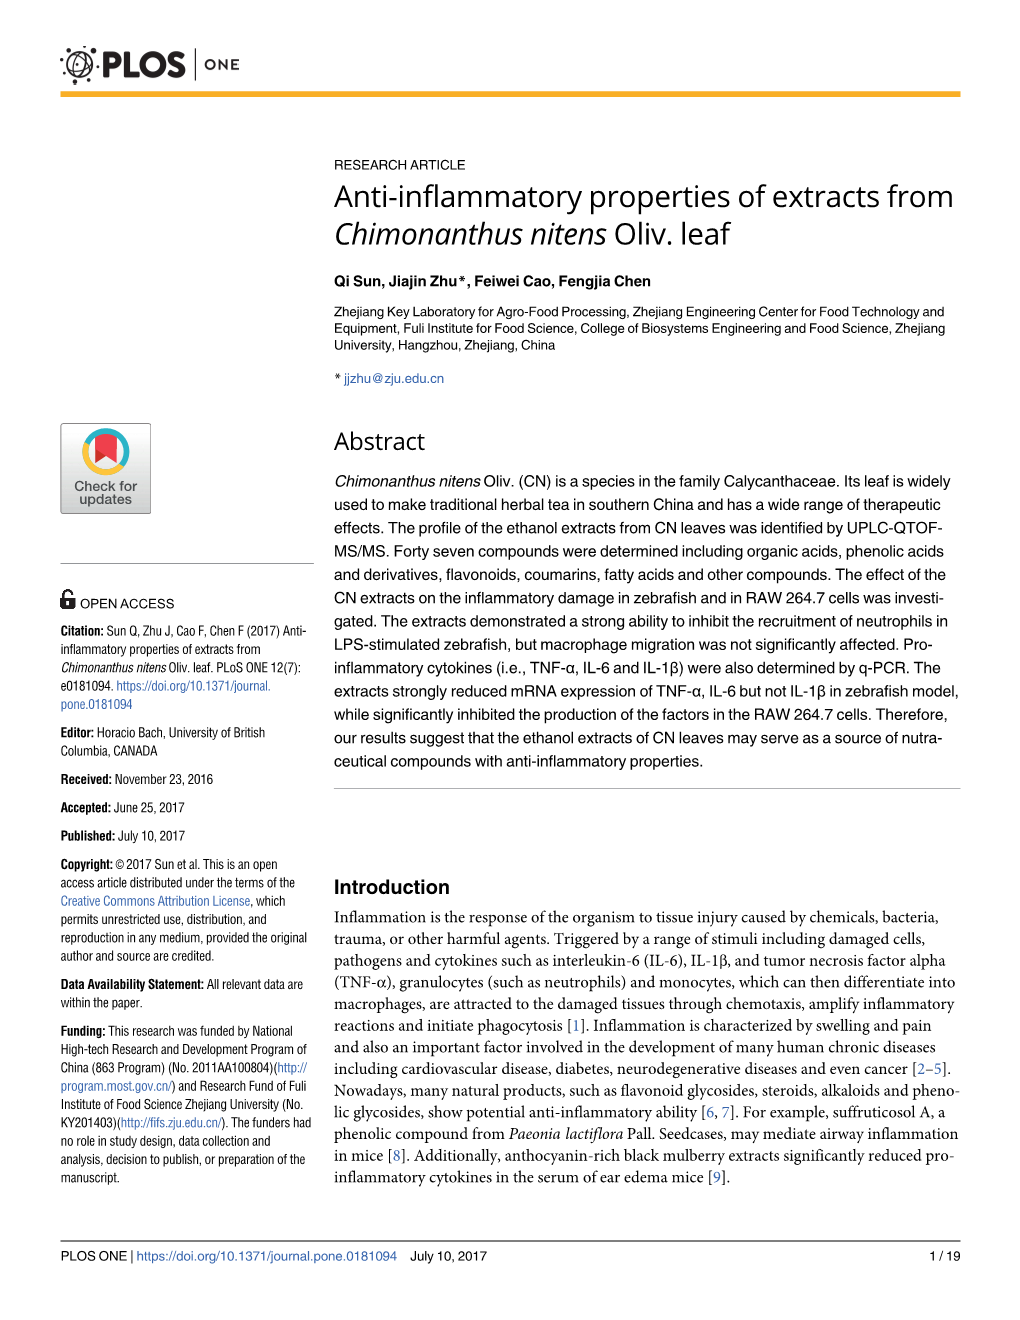 Anti-Inflammatory Properties of Extracts from Chimonanthus Nitens Oliv. Leaf